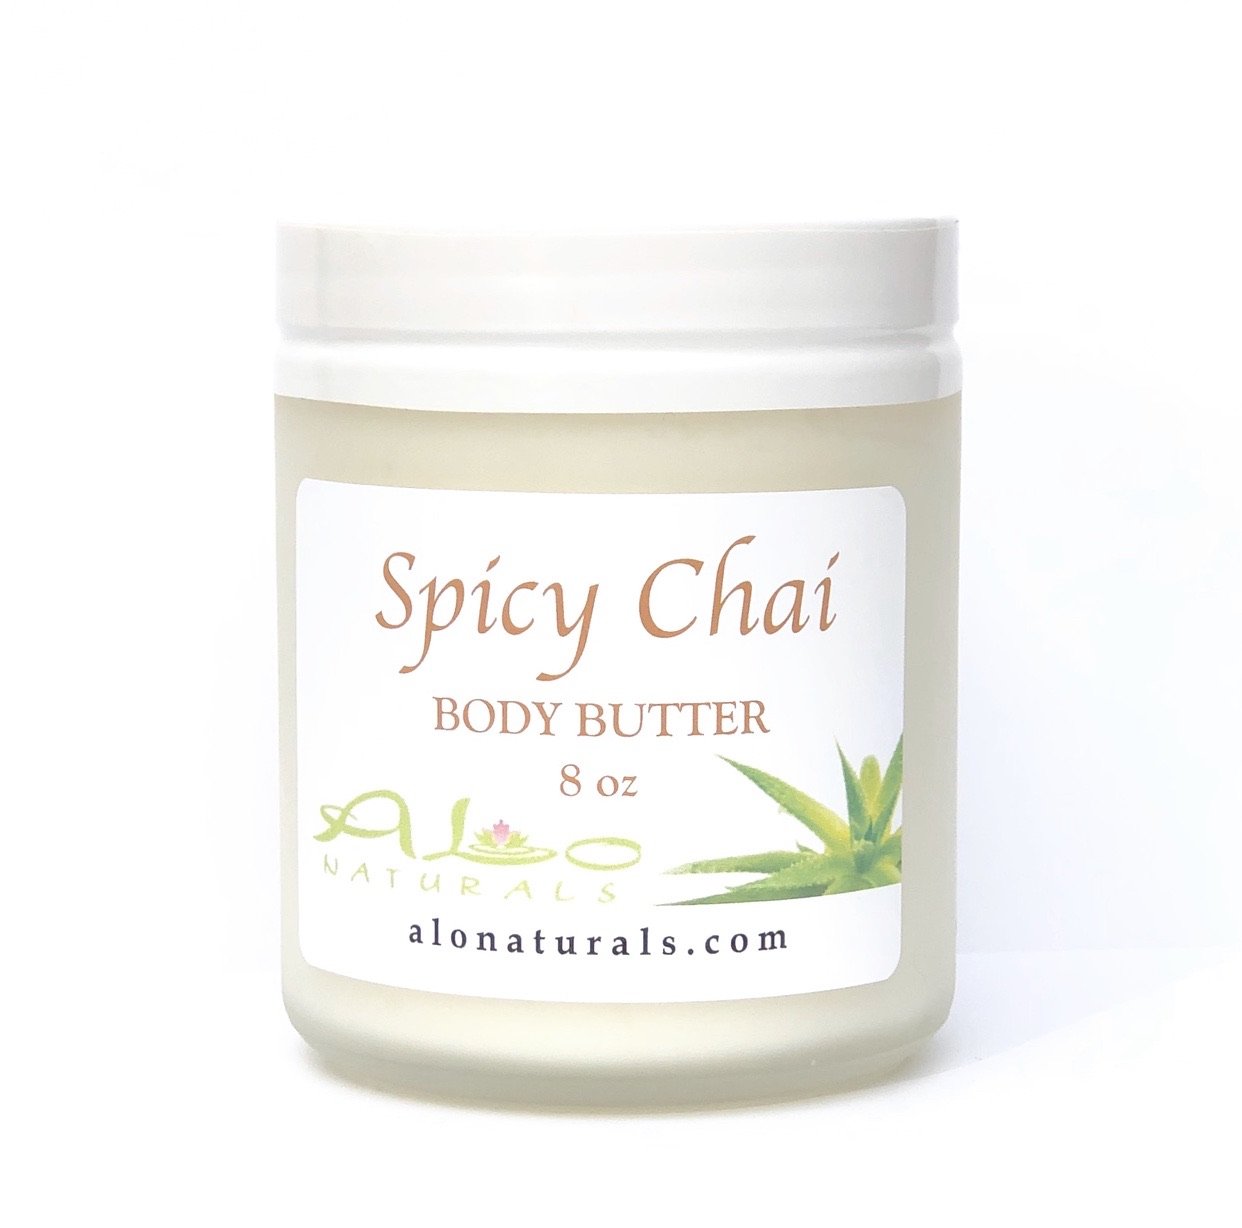 All natural body butter in Spicy Chai scent.  Super moisturizing and hydrating.  For full body and skin.  8oz jar.